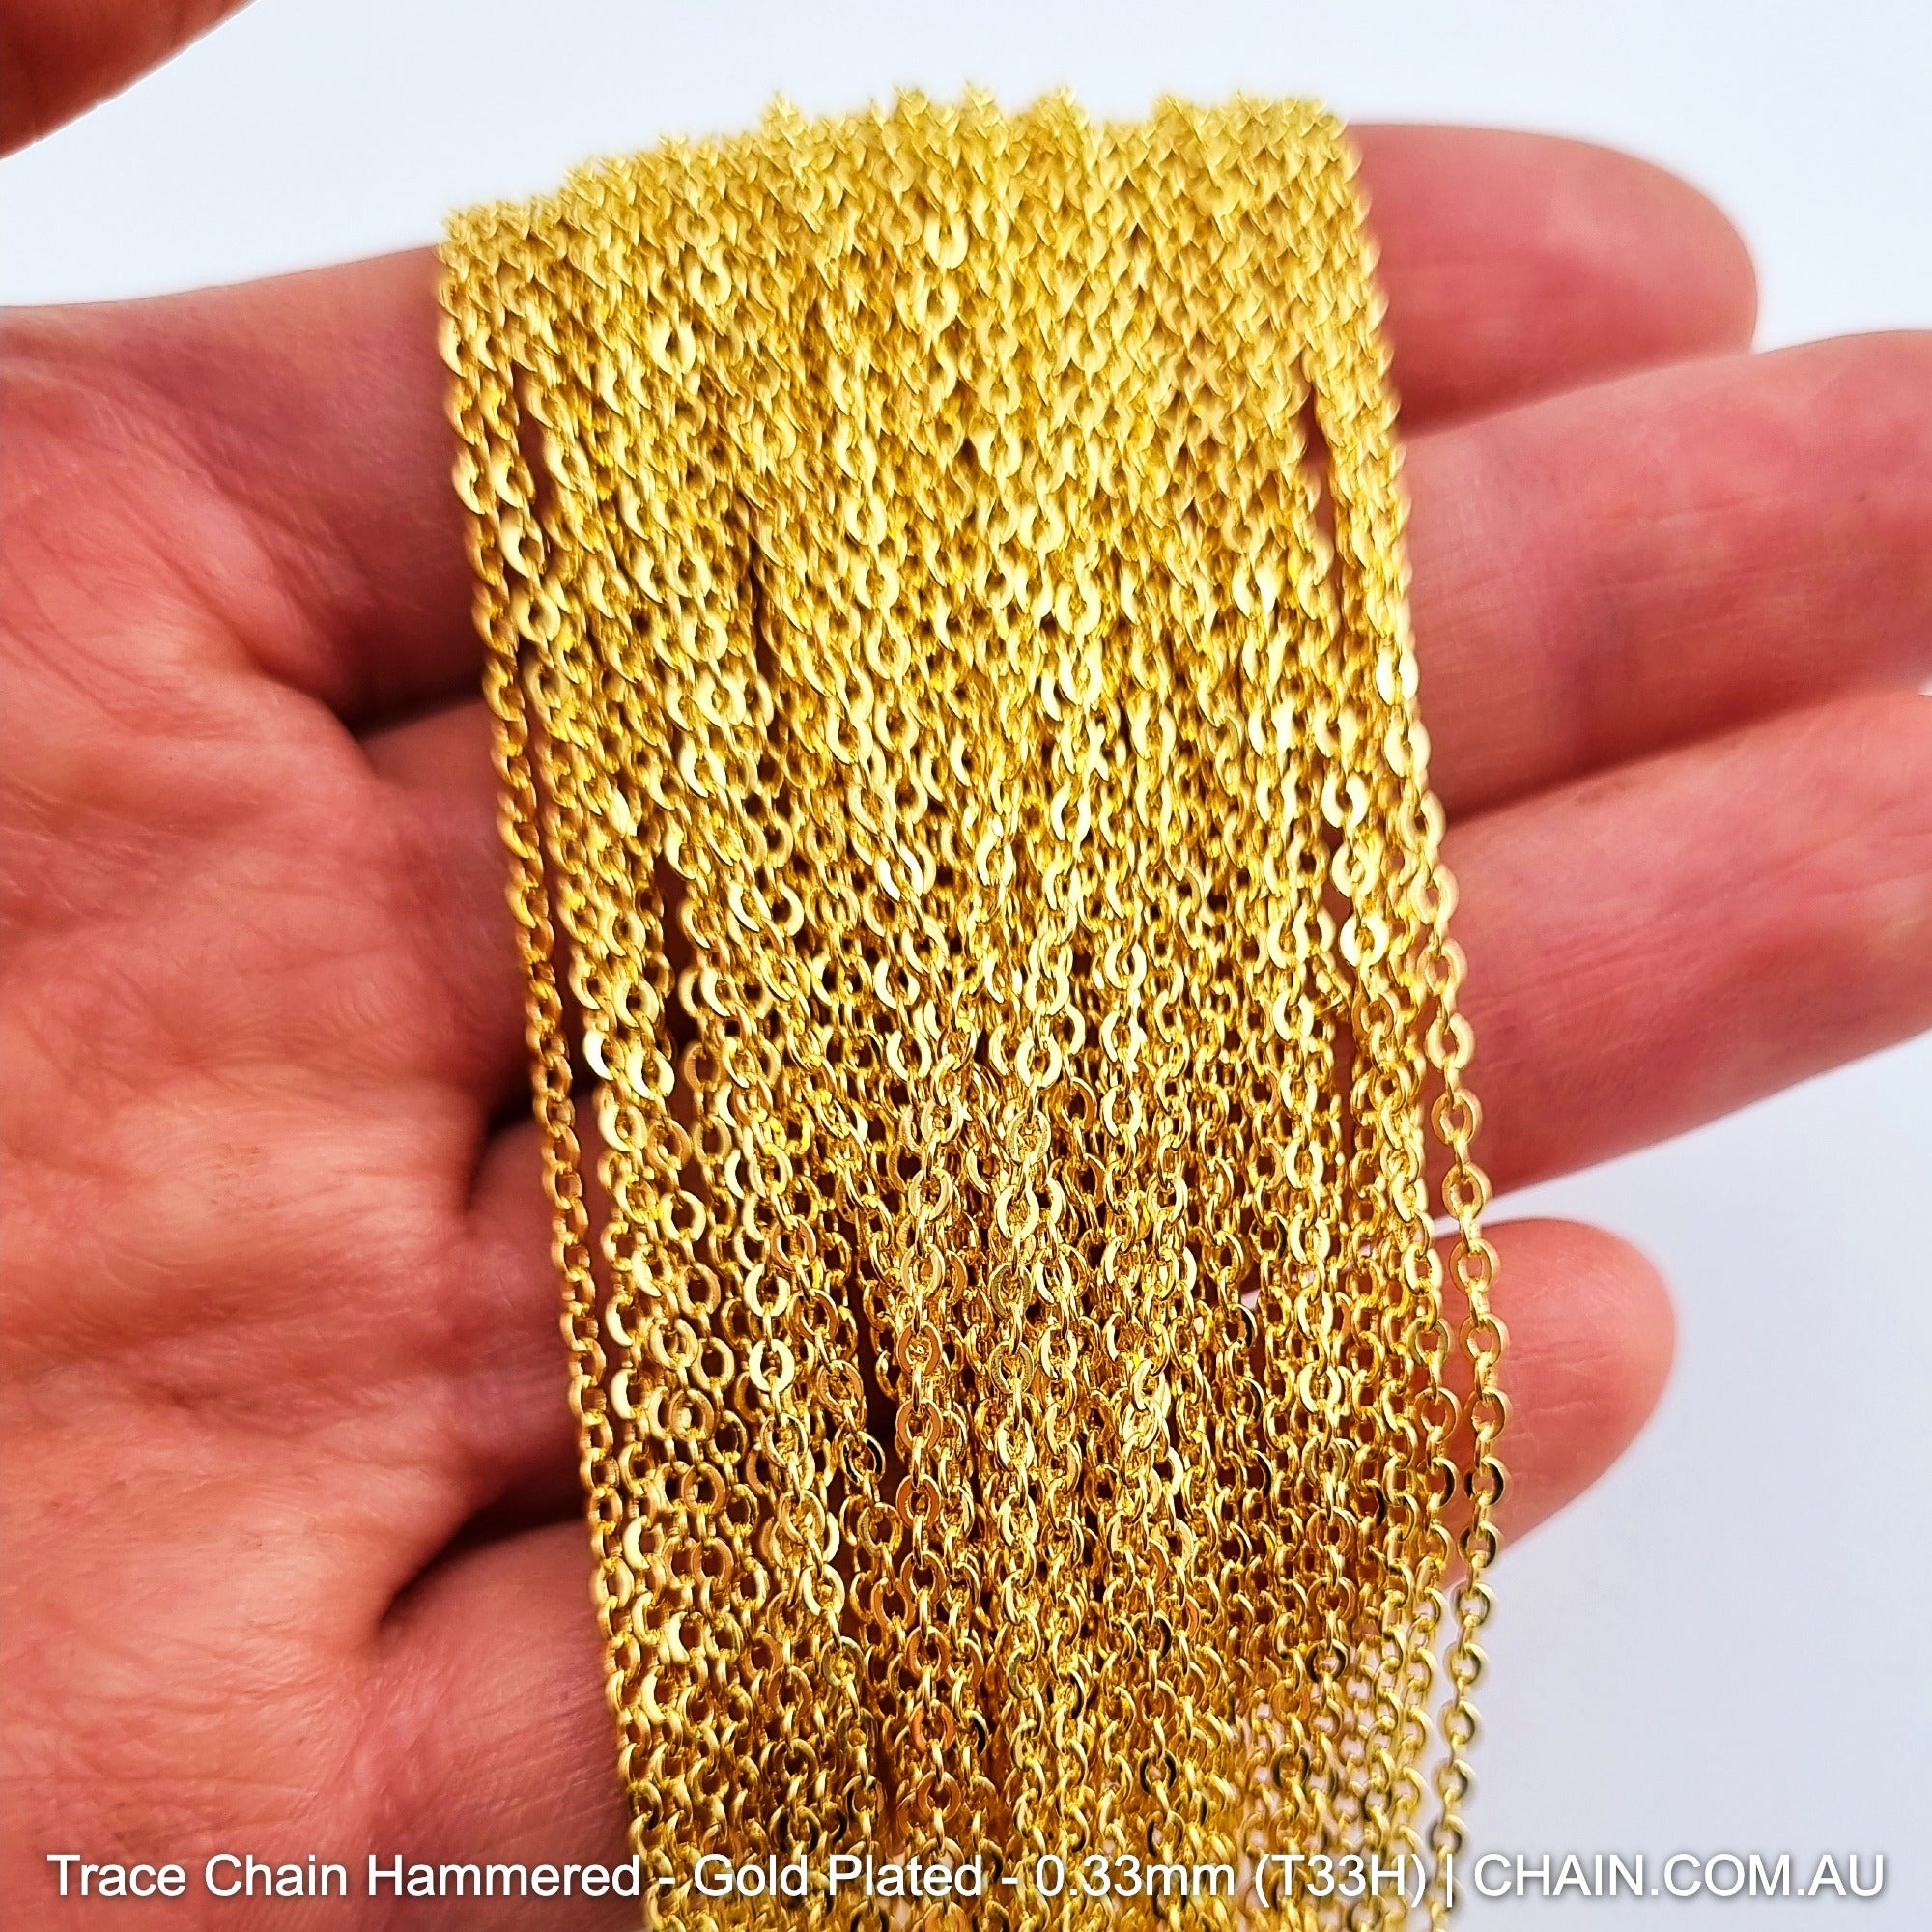 Hammered Trace Chain in a Gold Plated Finish. Size: 0.33mm, T33H. Jewellery Chain, Australia wide shipping. Shop chain.com.au